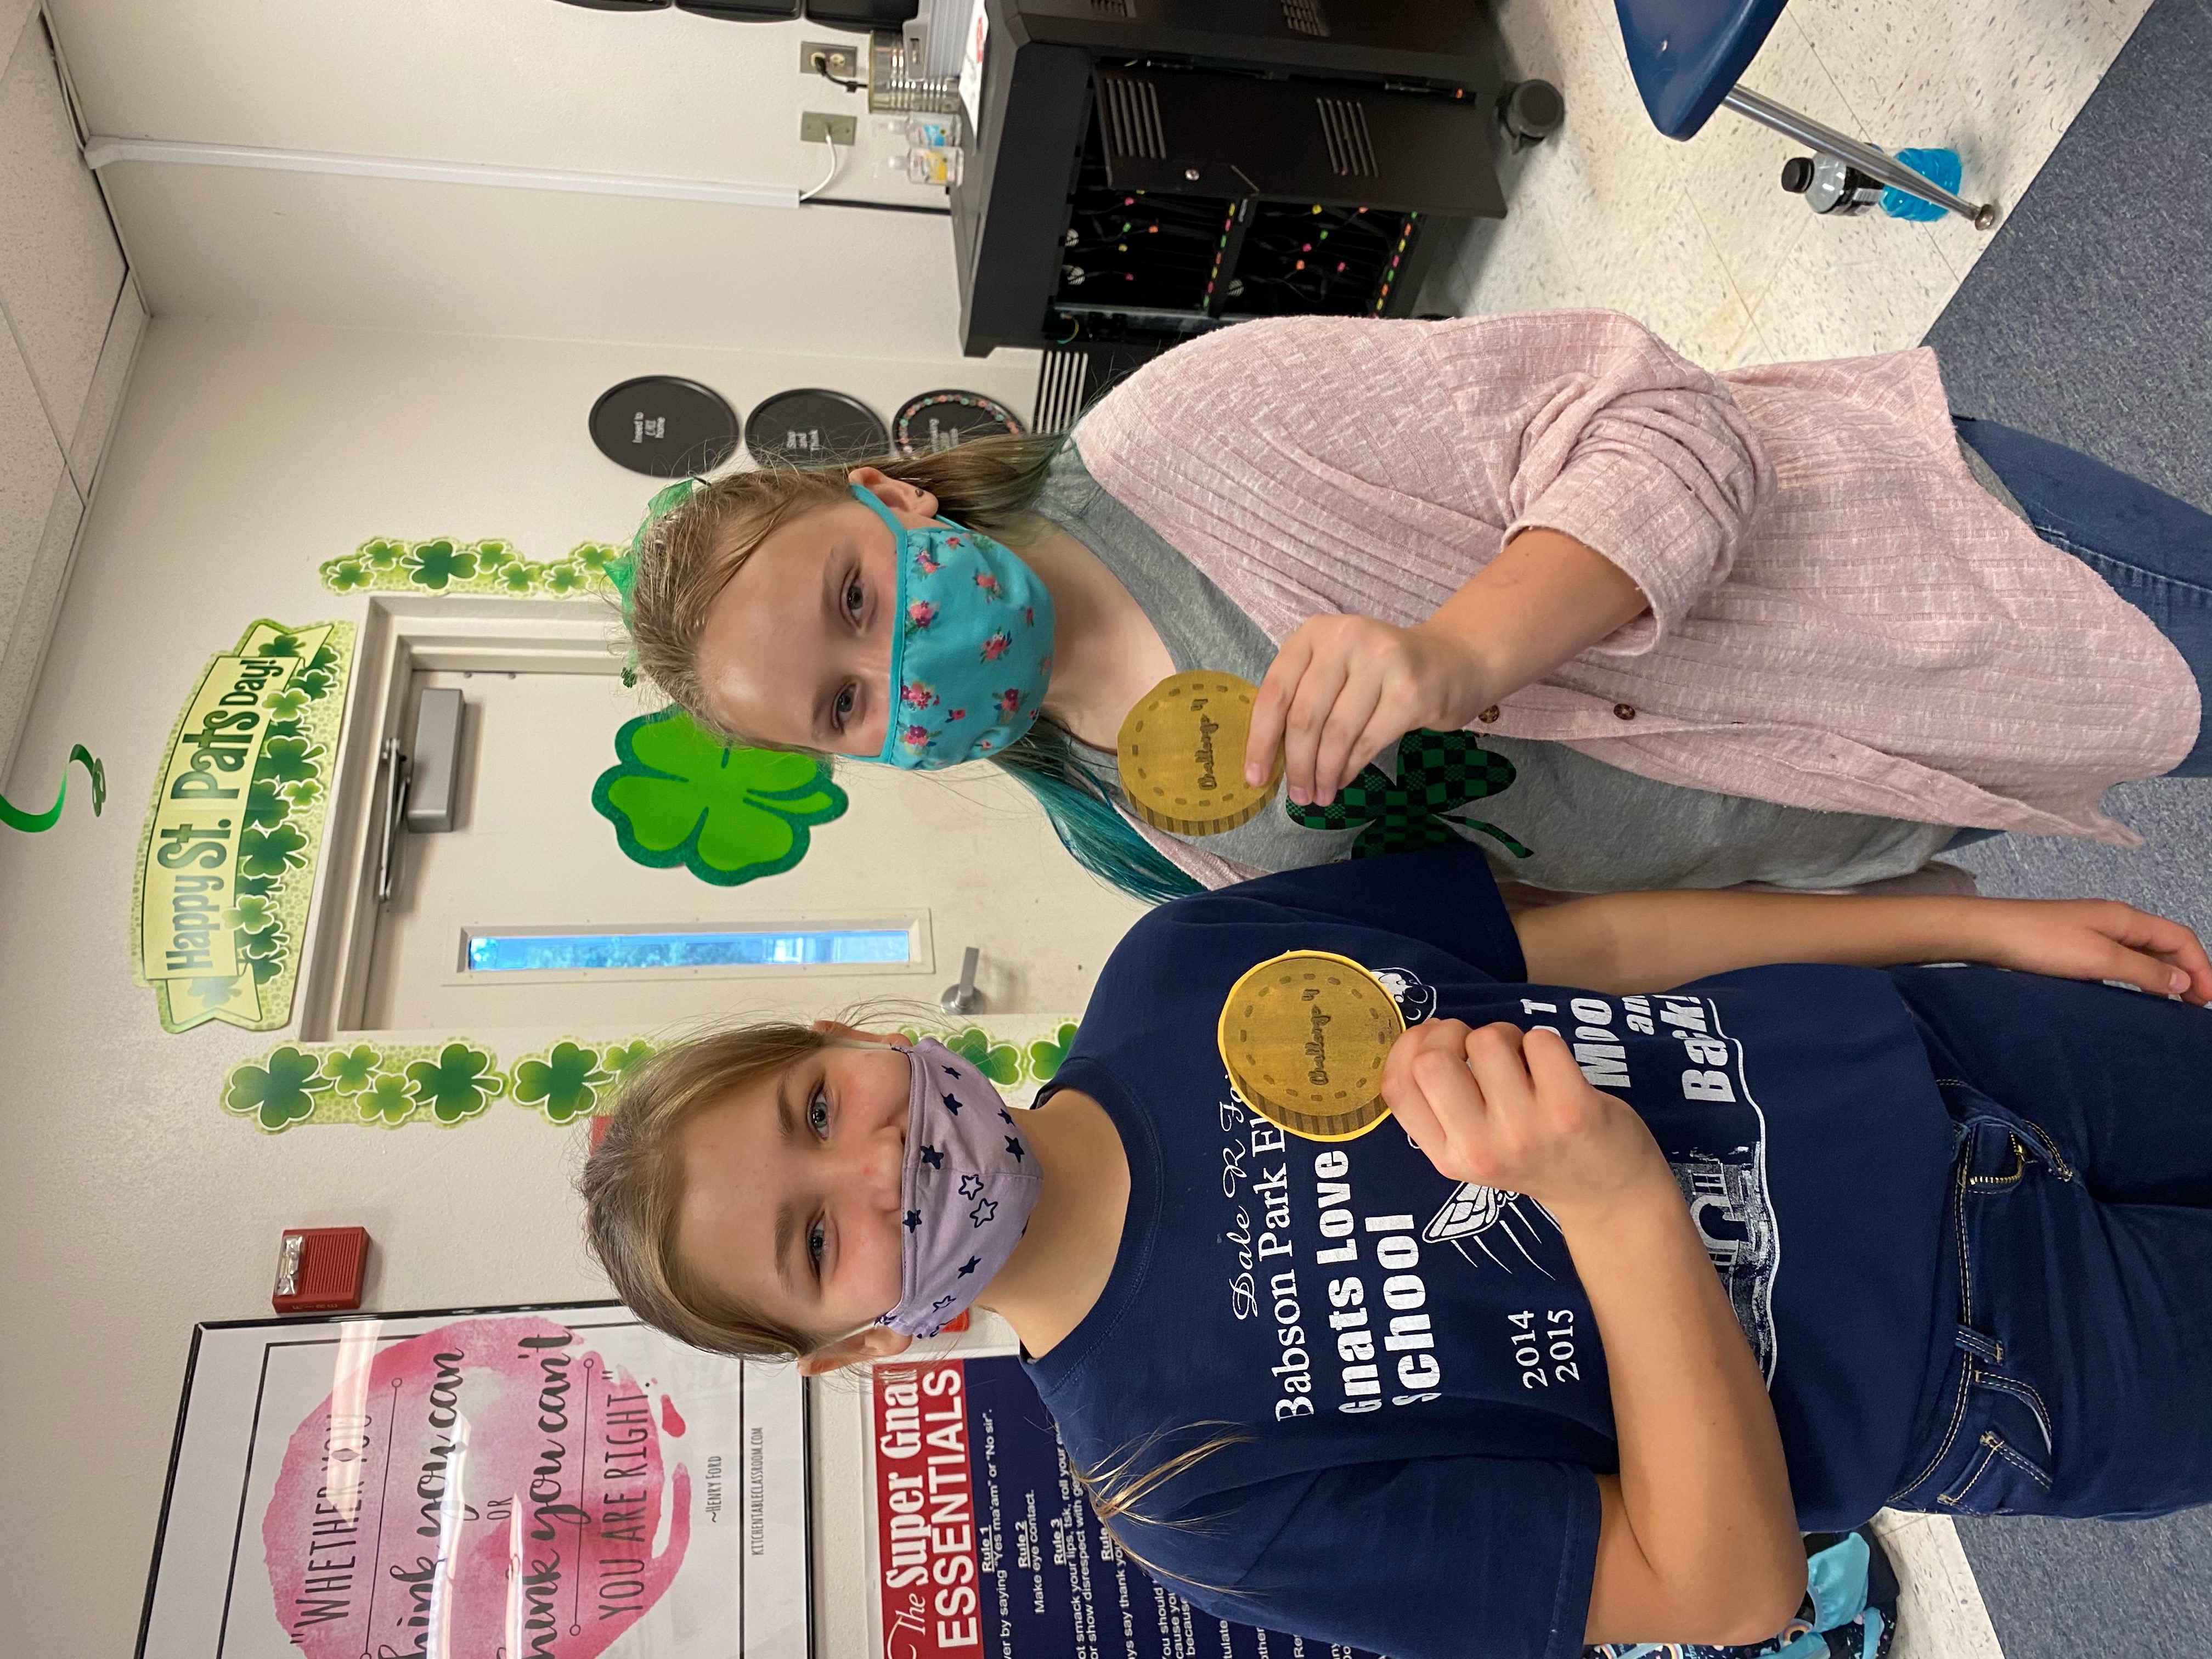 5th grade students showing the coins they earned.